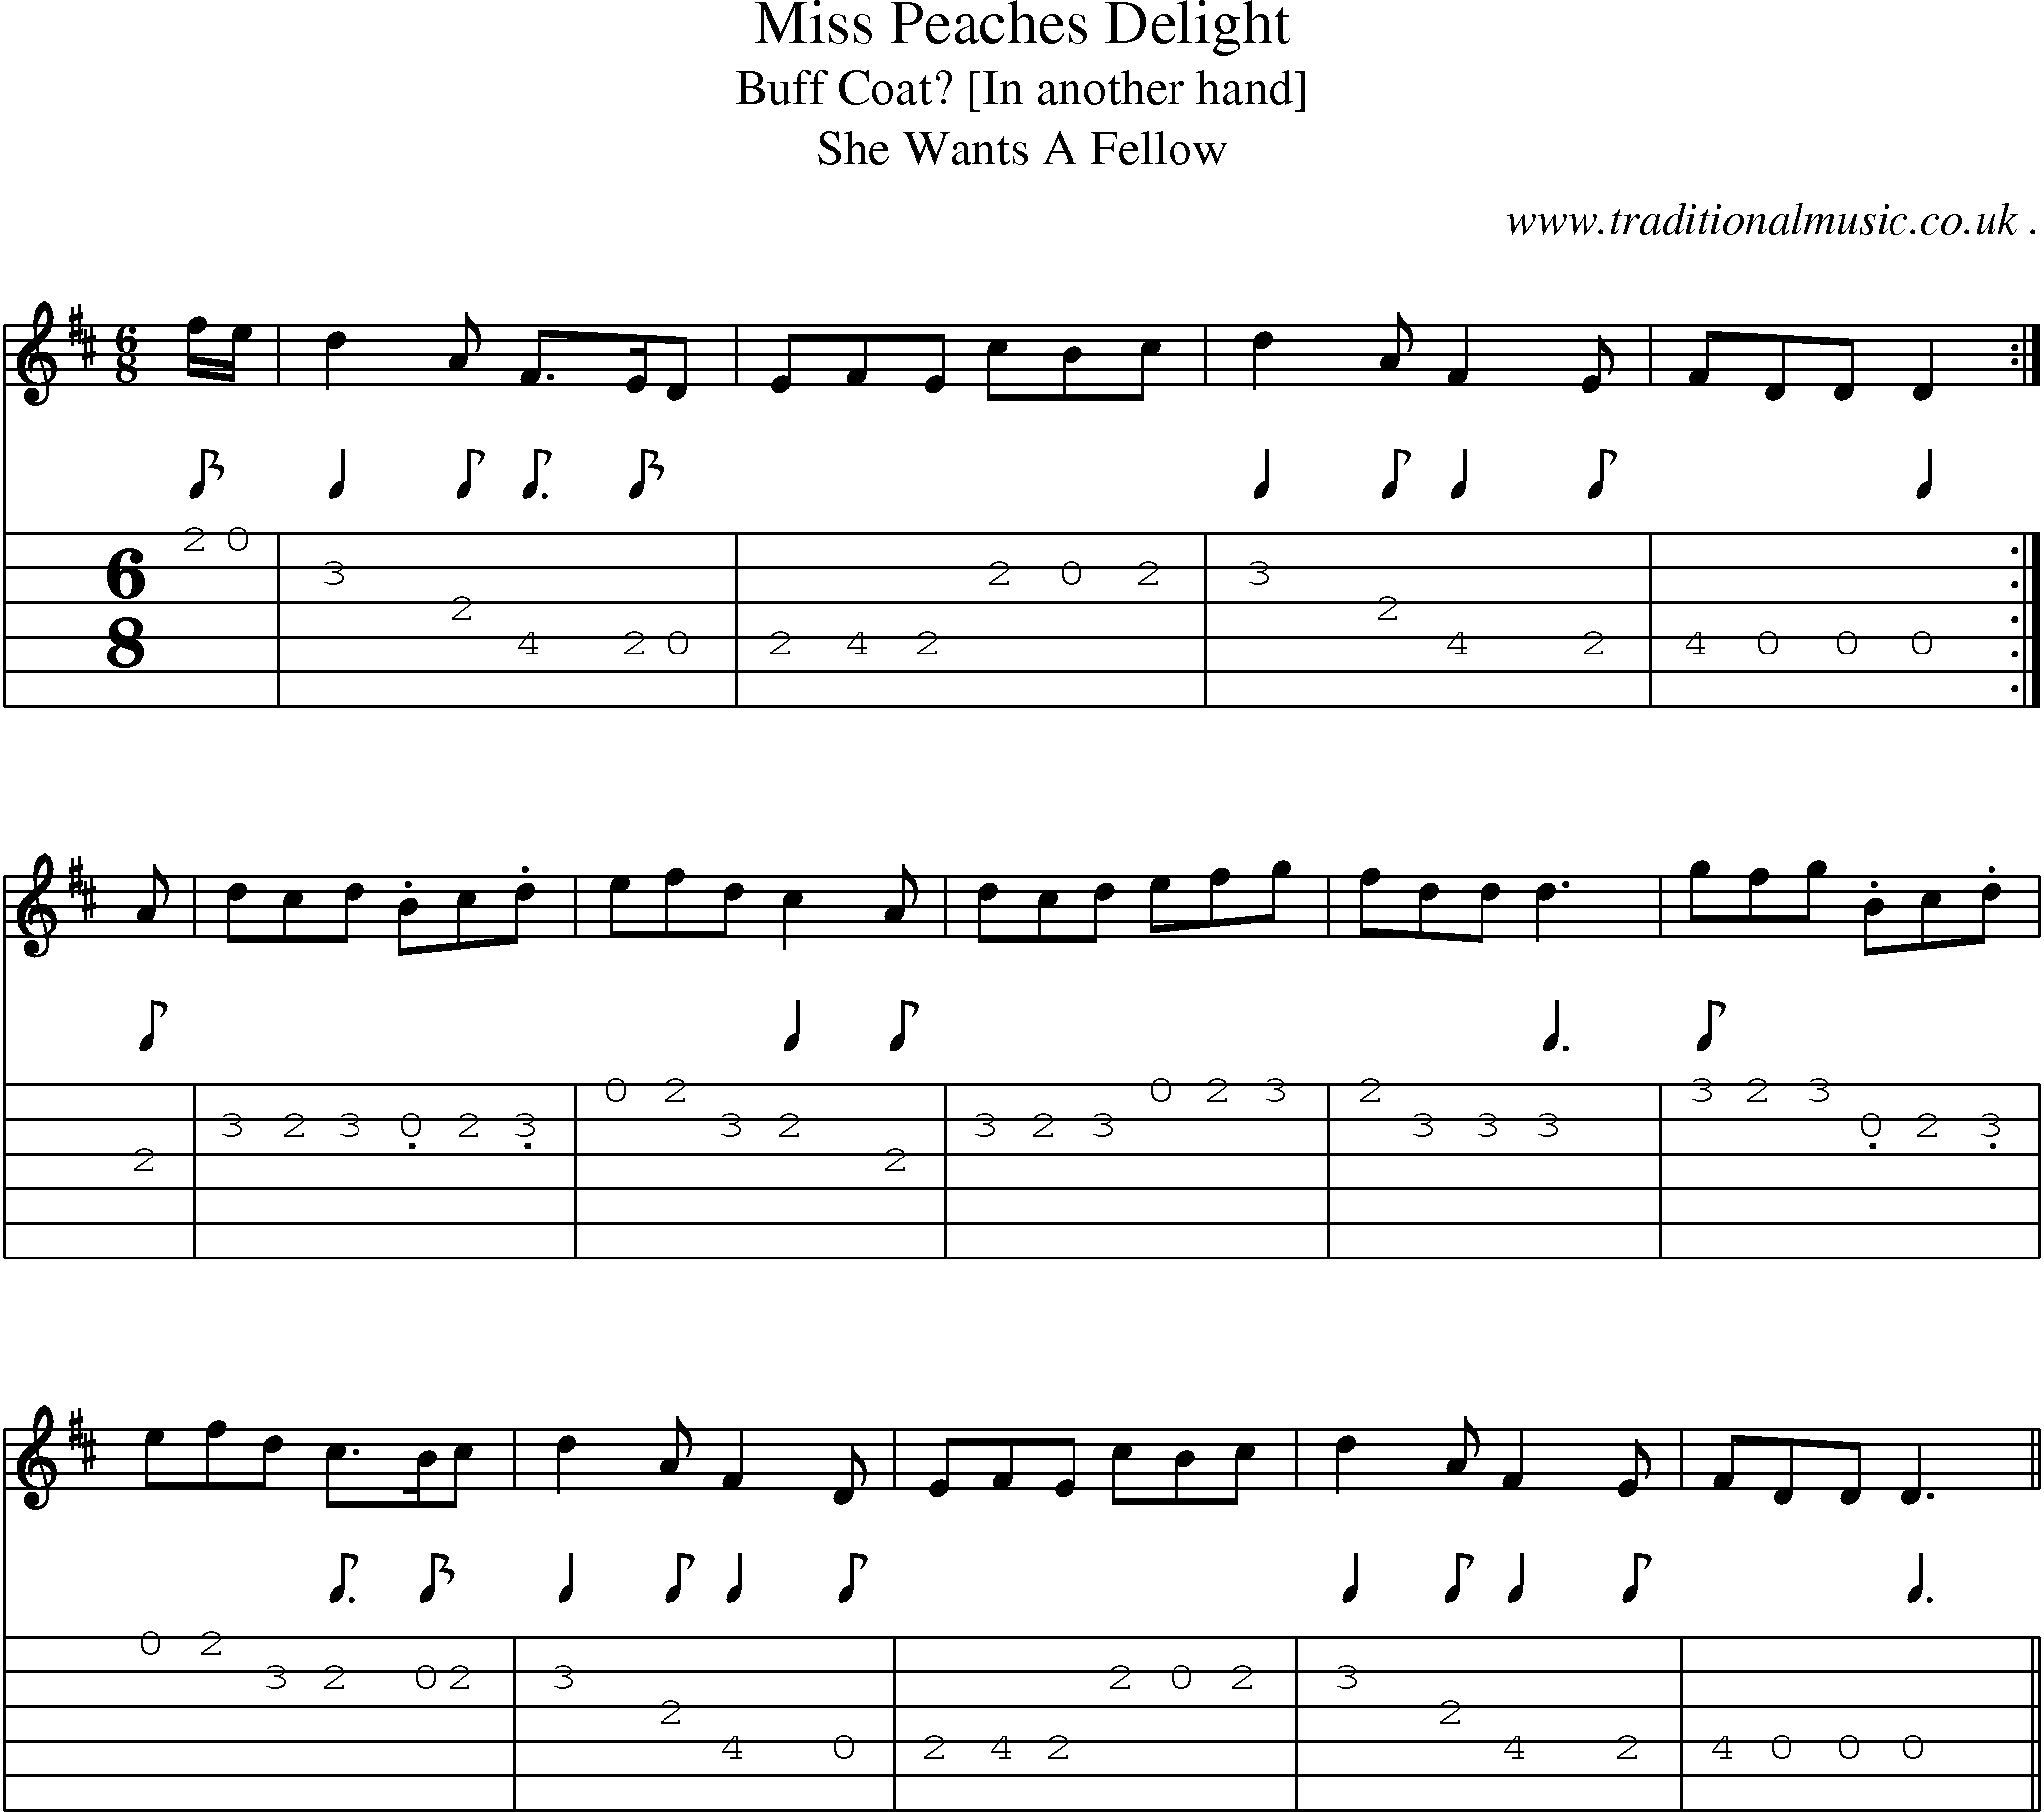 Sheet-Music and Guitar Tabs for Miss Peaches Delight